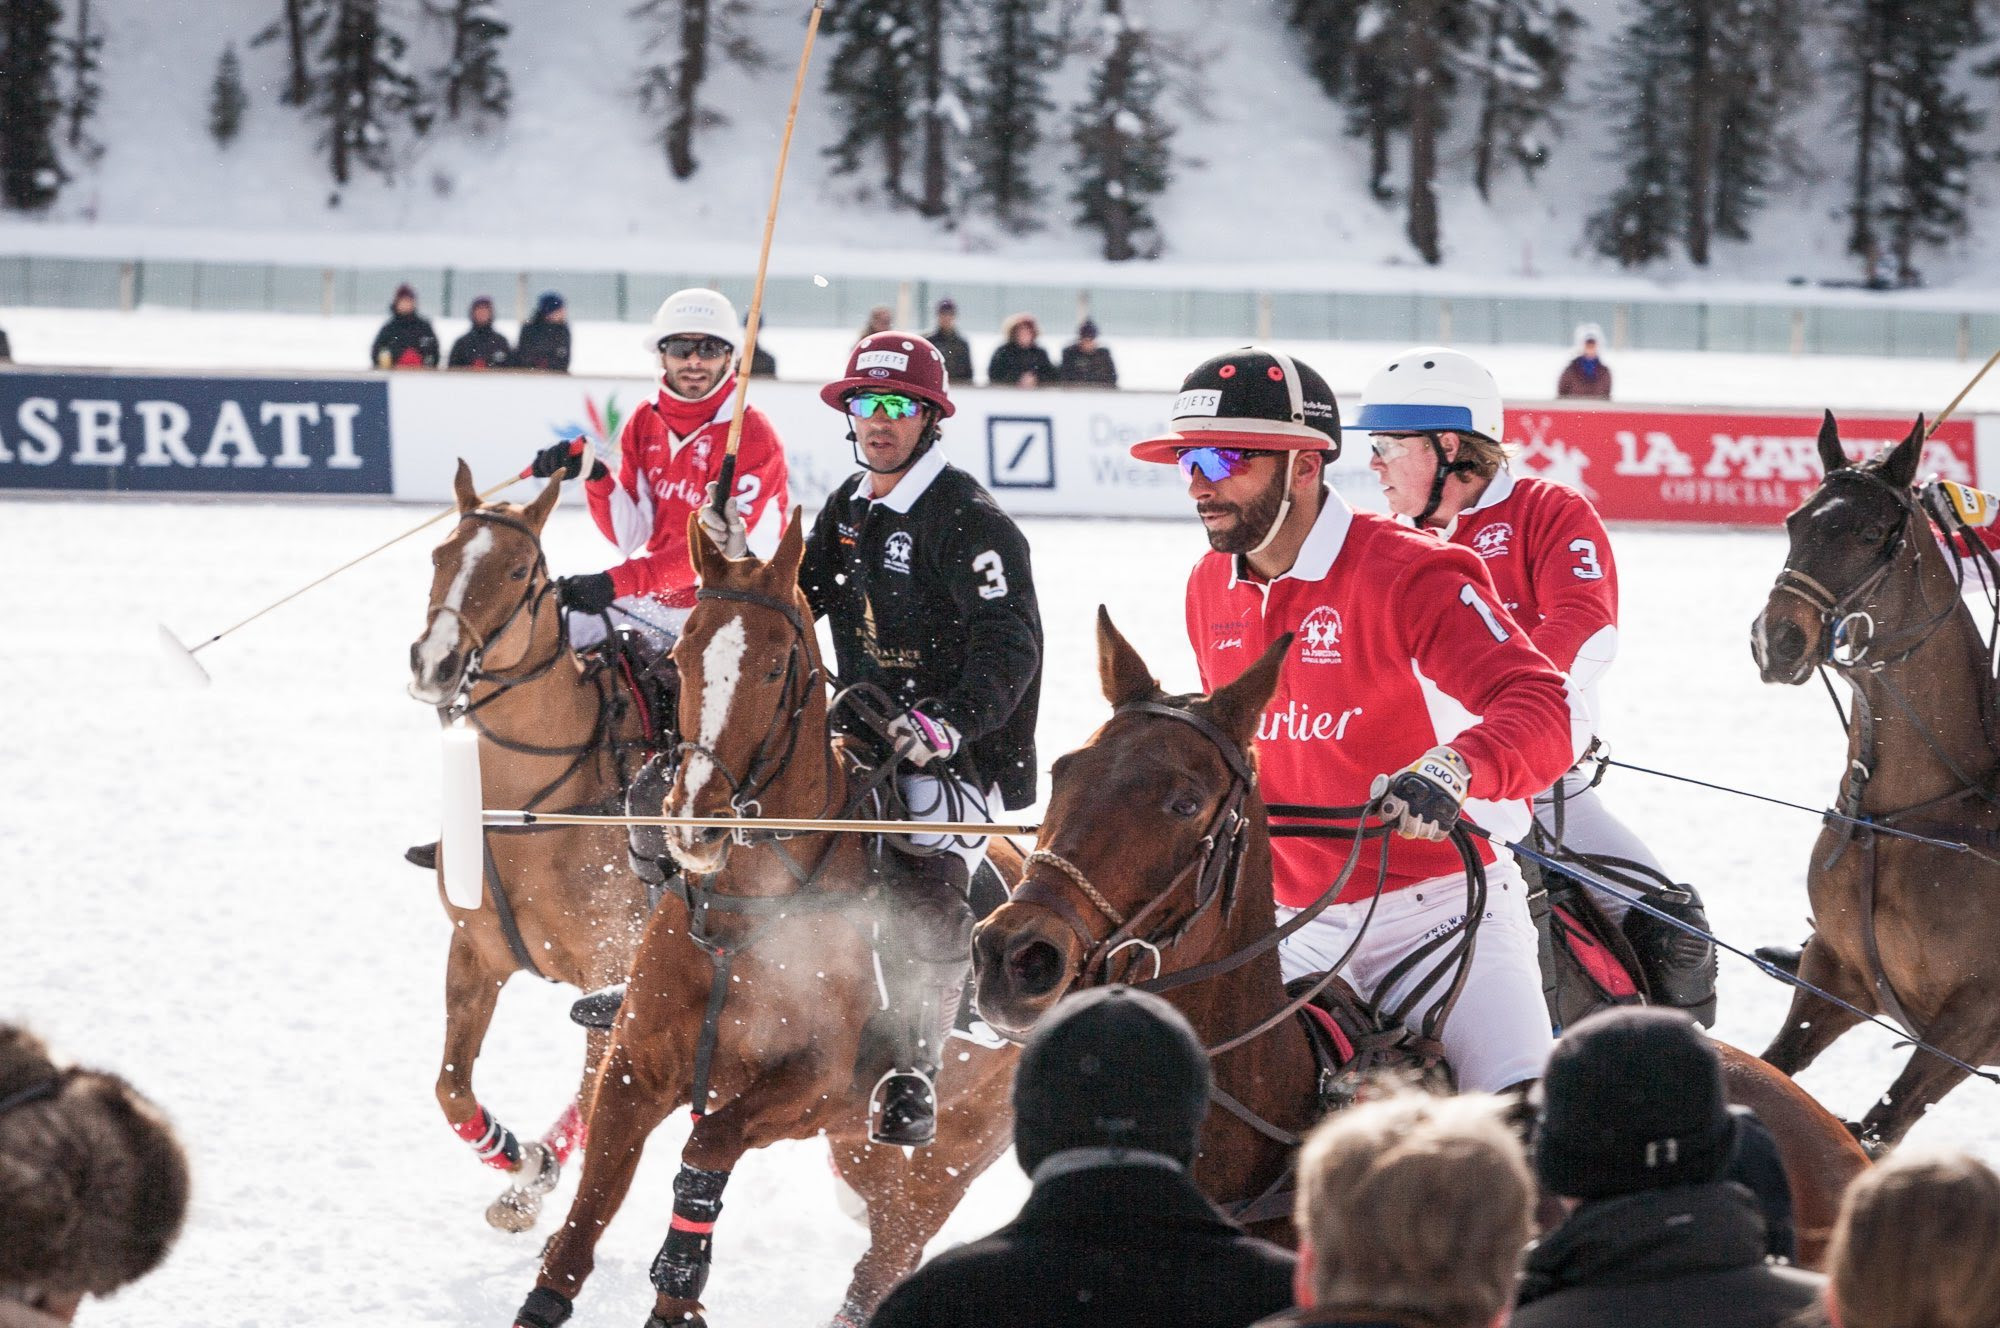 SNOW POLO WORLD CUP TICKETS NOW ON SALE